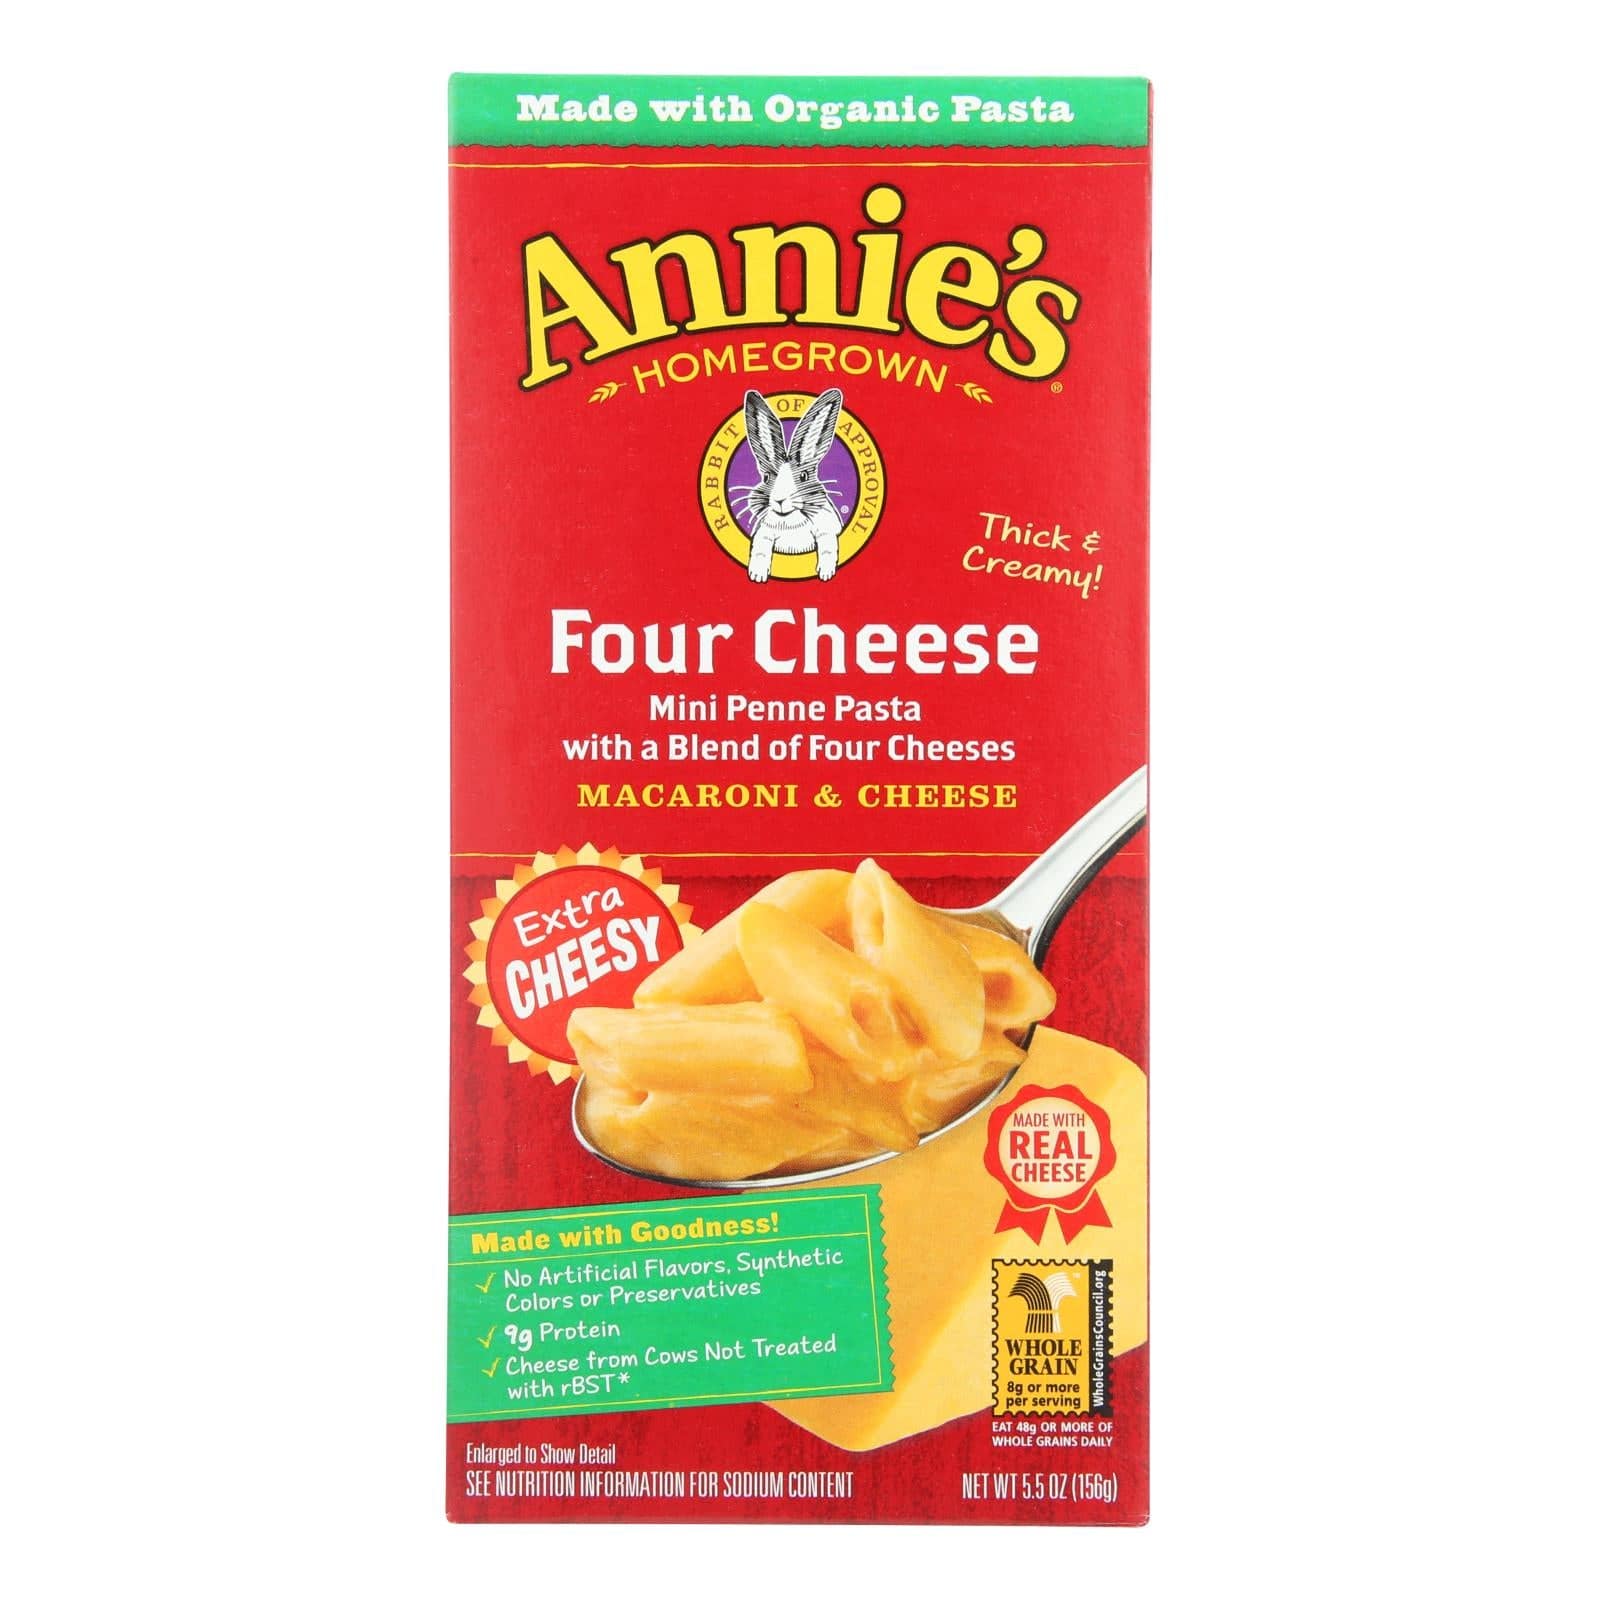 Buy Annie's Homegrown Four Cheese Macaroni And Cheese - Case Of 12 - 5.5 Oz.  at OnlyNaturals.us